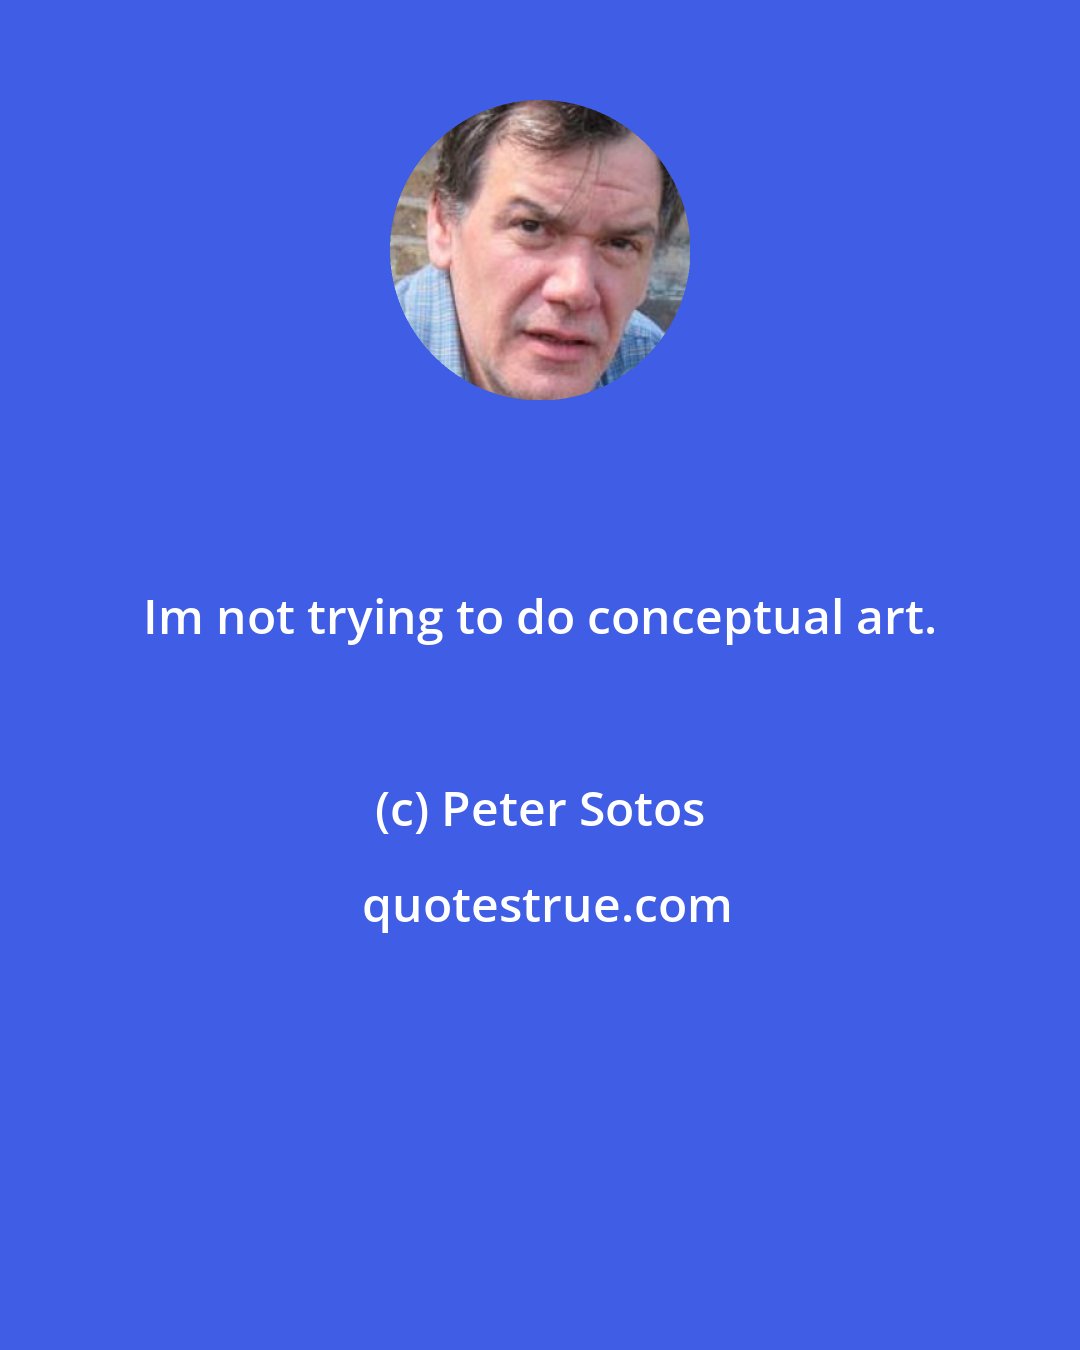 Peter Sotos: Im not trying to do conceptual art.